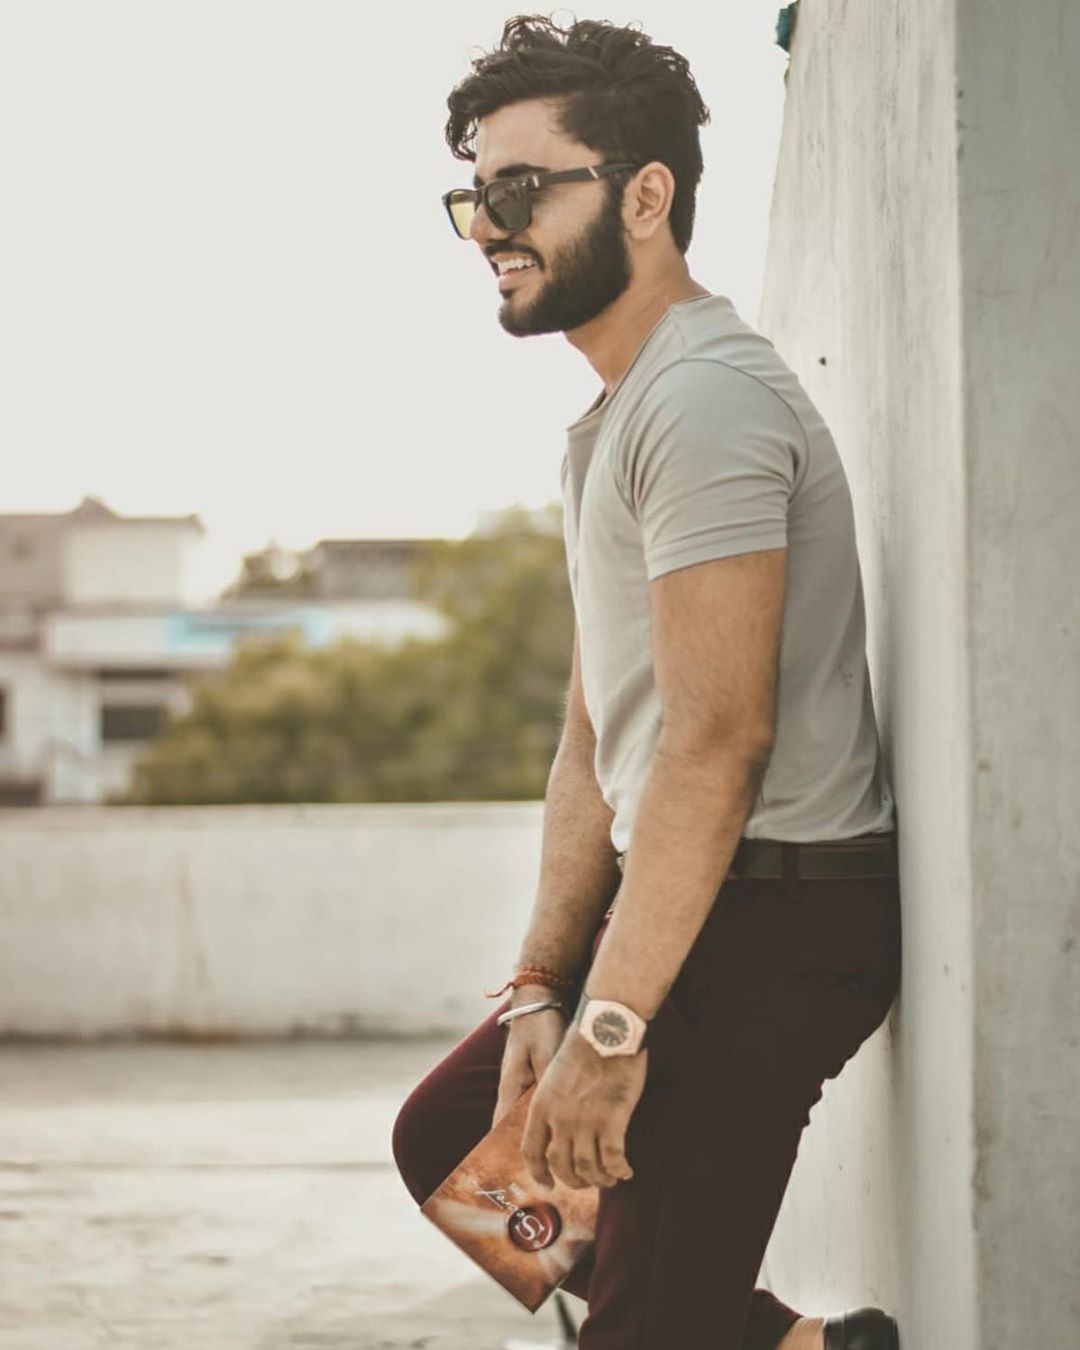 MYNTRA - The secret to looking good is no secret at all. Dare to experiment with your style. Agrees @dapper.pro who teams a basic grey tee with a pair of maroon chinos, like a pro! 
Look up product co...